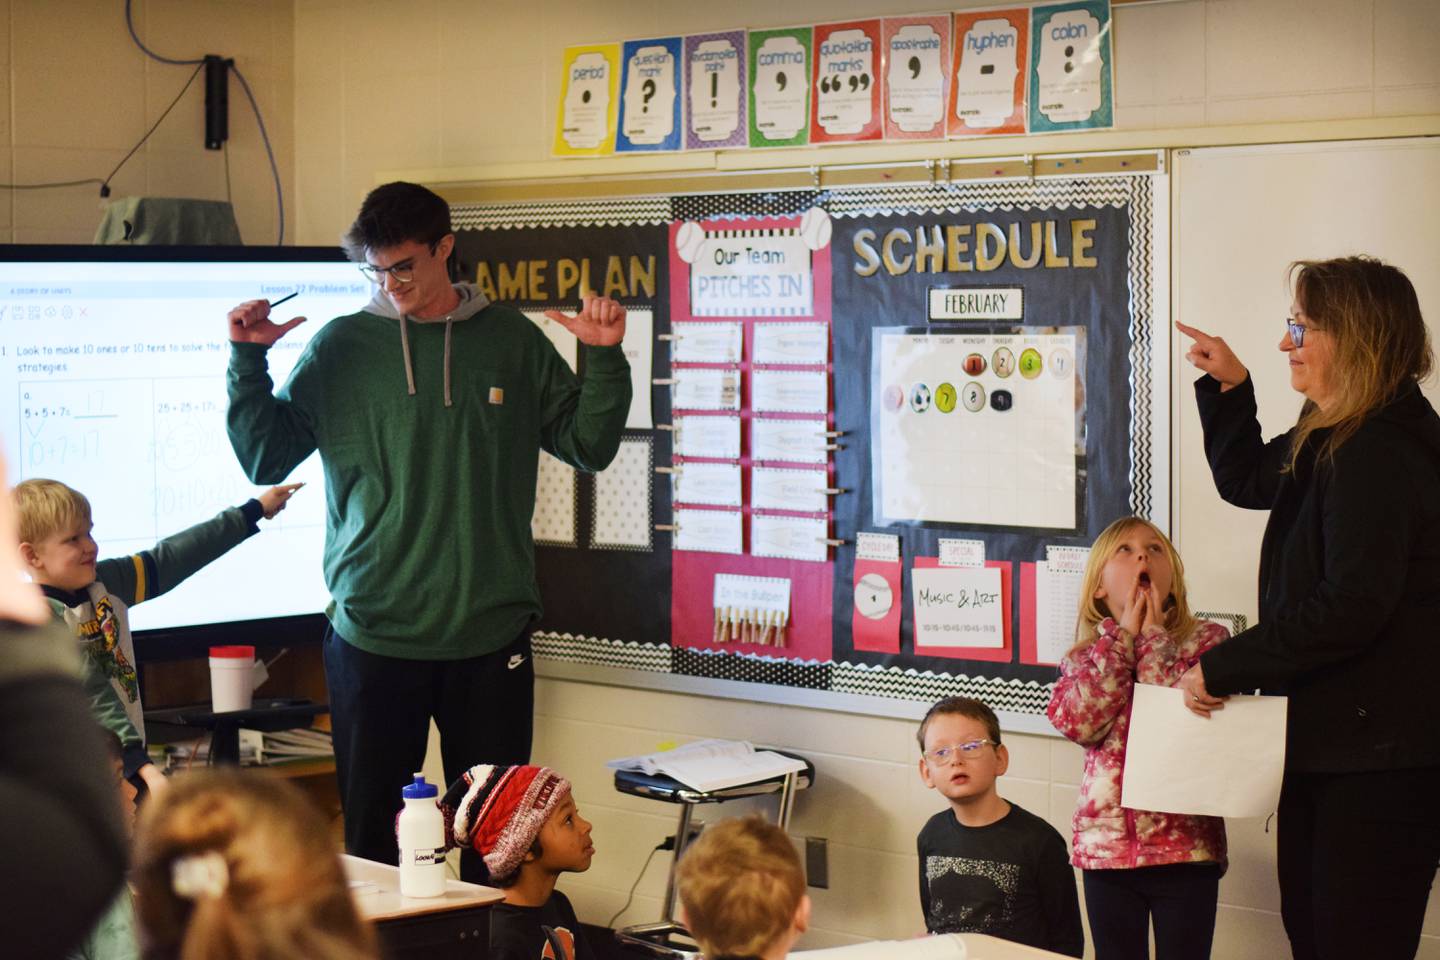 Trey Vanderlaan, a second grade teacher at Emerson Hough Elementary, on Feb. 9 learns he is the recipient of the Newton Community Educational Foundation's Excellence in Education Award.